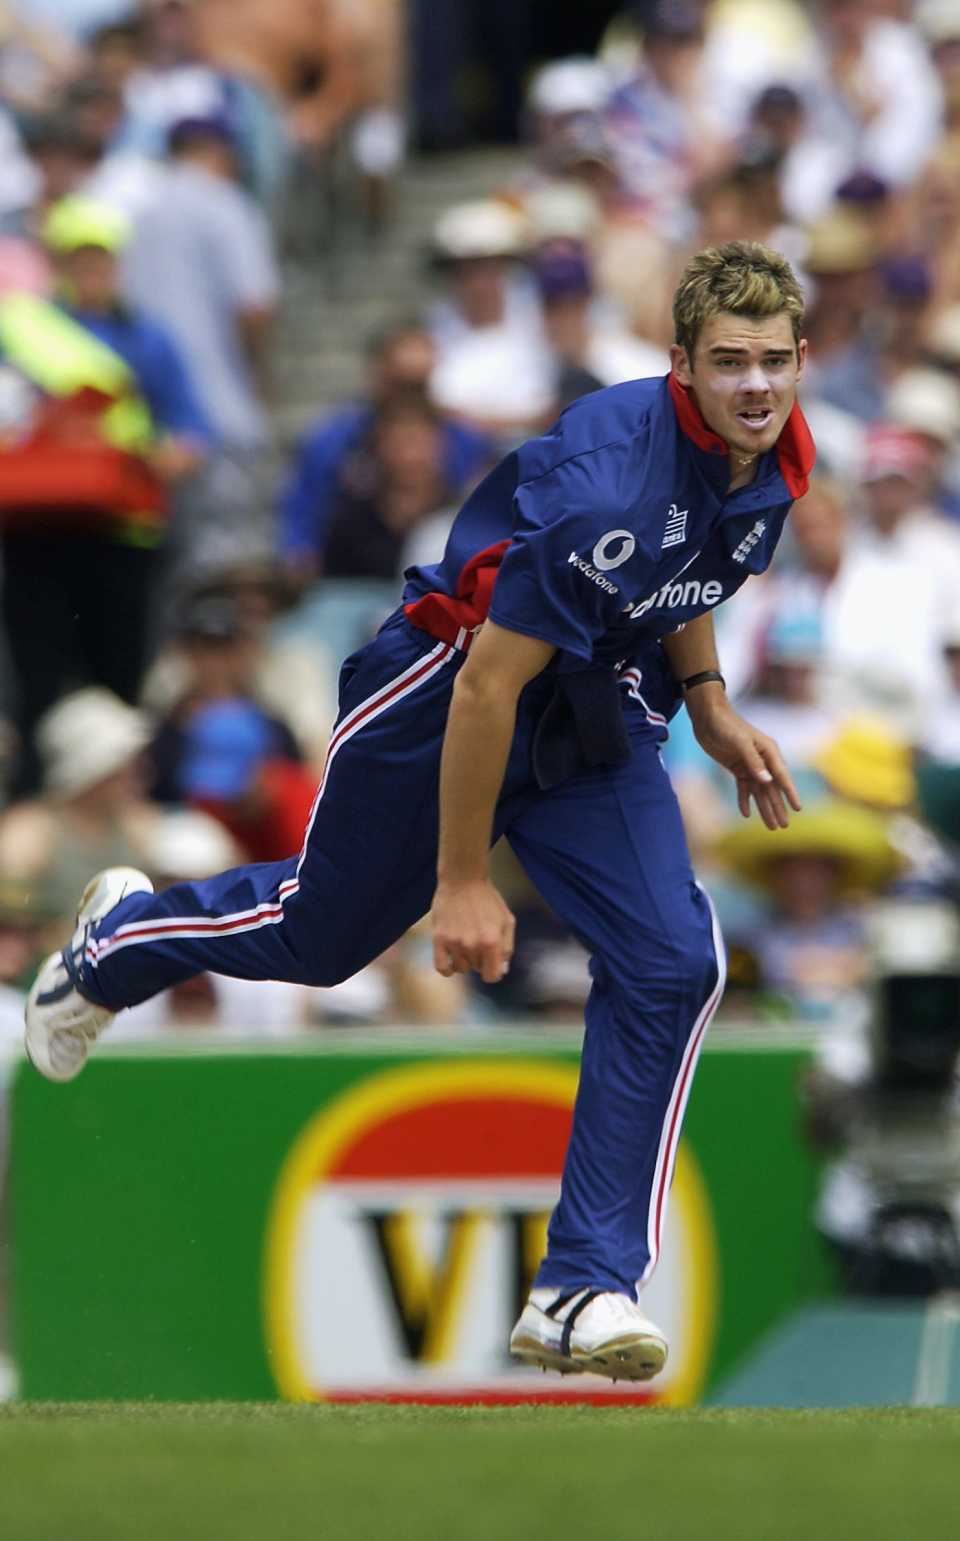 Jimmy Anderson bowls in his first international match, second ODI, Australia vs England, VB Tri-Nation series, Melbourne, December 15, 2002